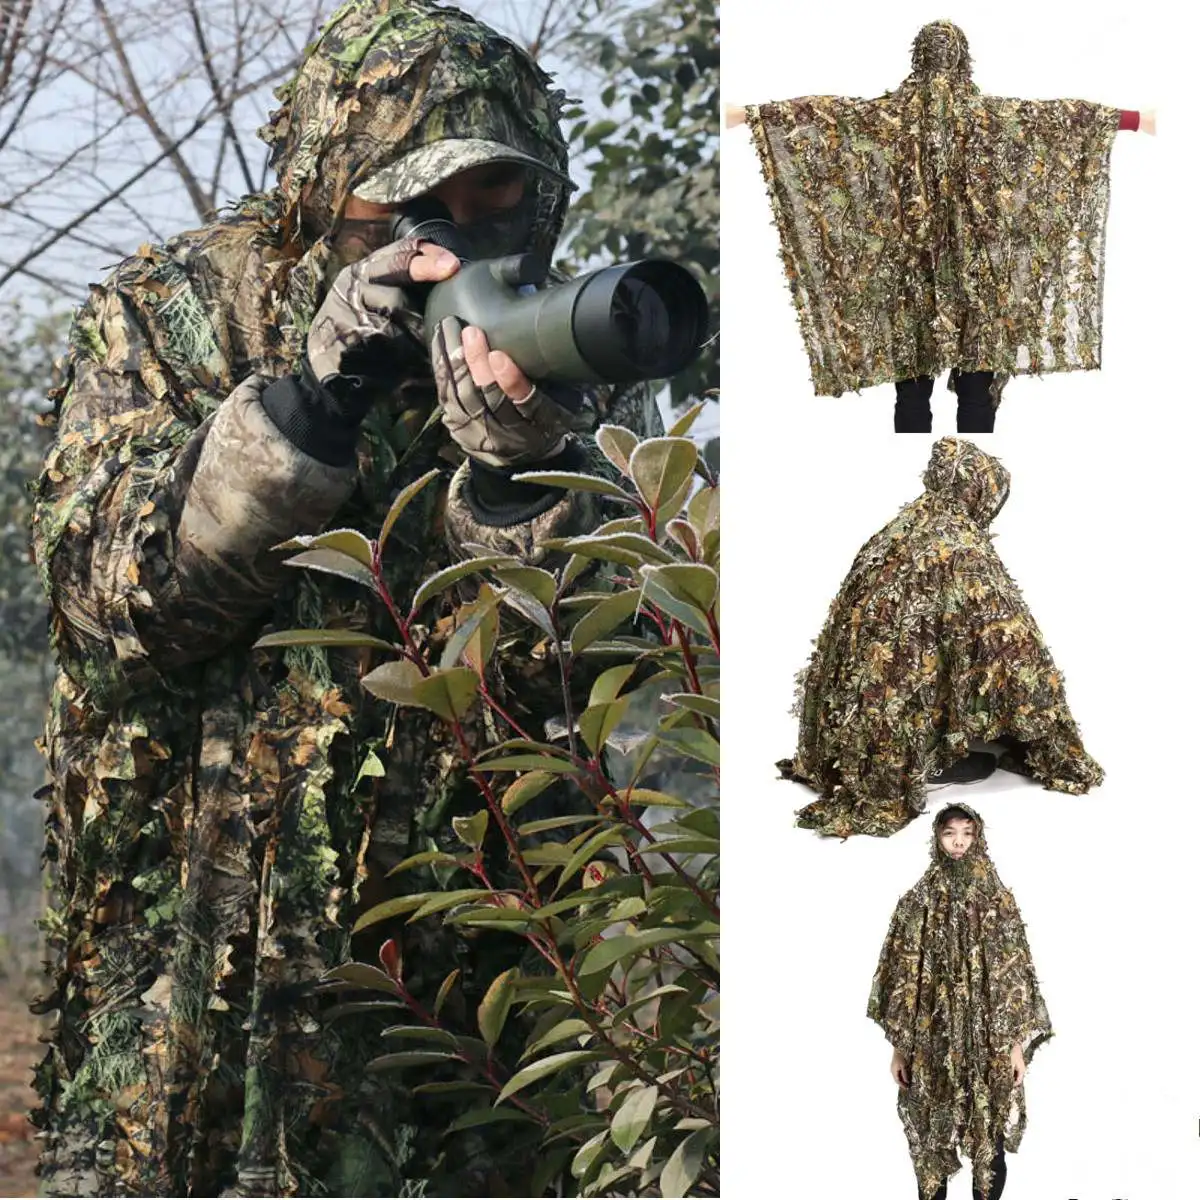 

Outdoor 3D Leaves Camouflage Ghillie Poncho Camo Cape Cloak Stealth Ghillie Suit Military CS Woodland Hunting Clothing Free Size